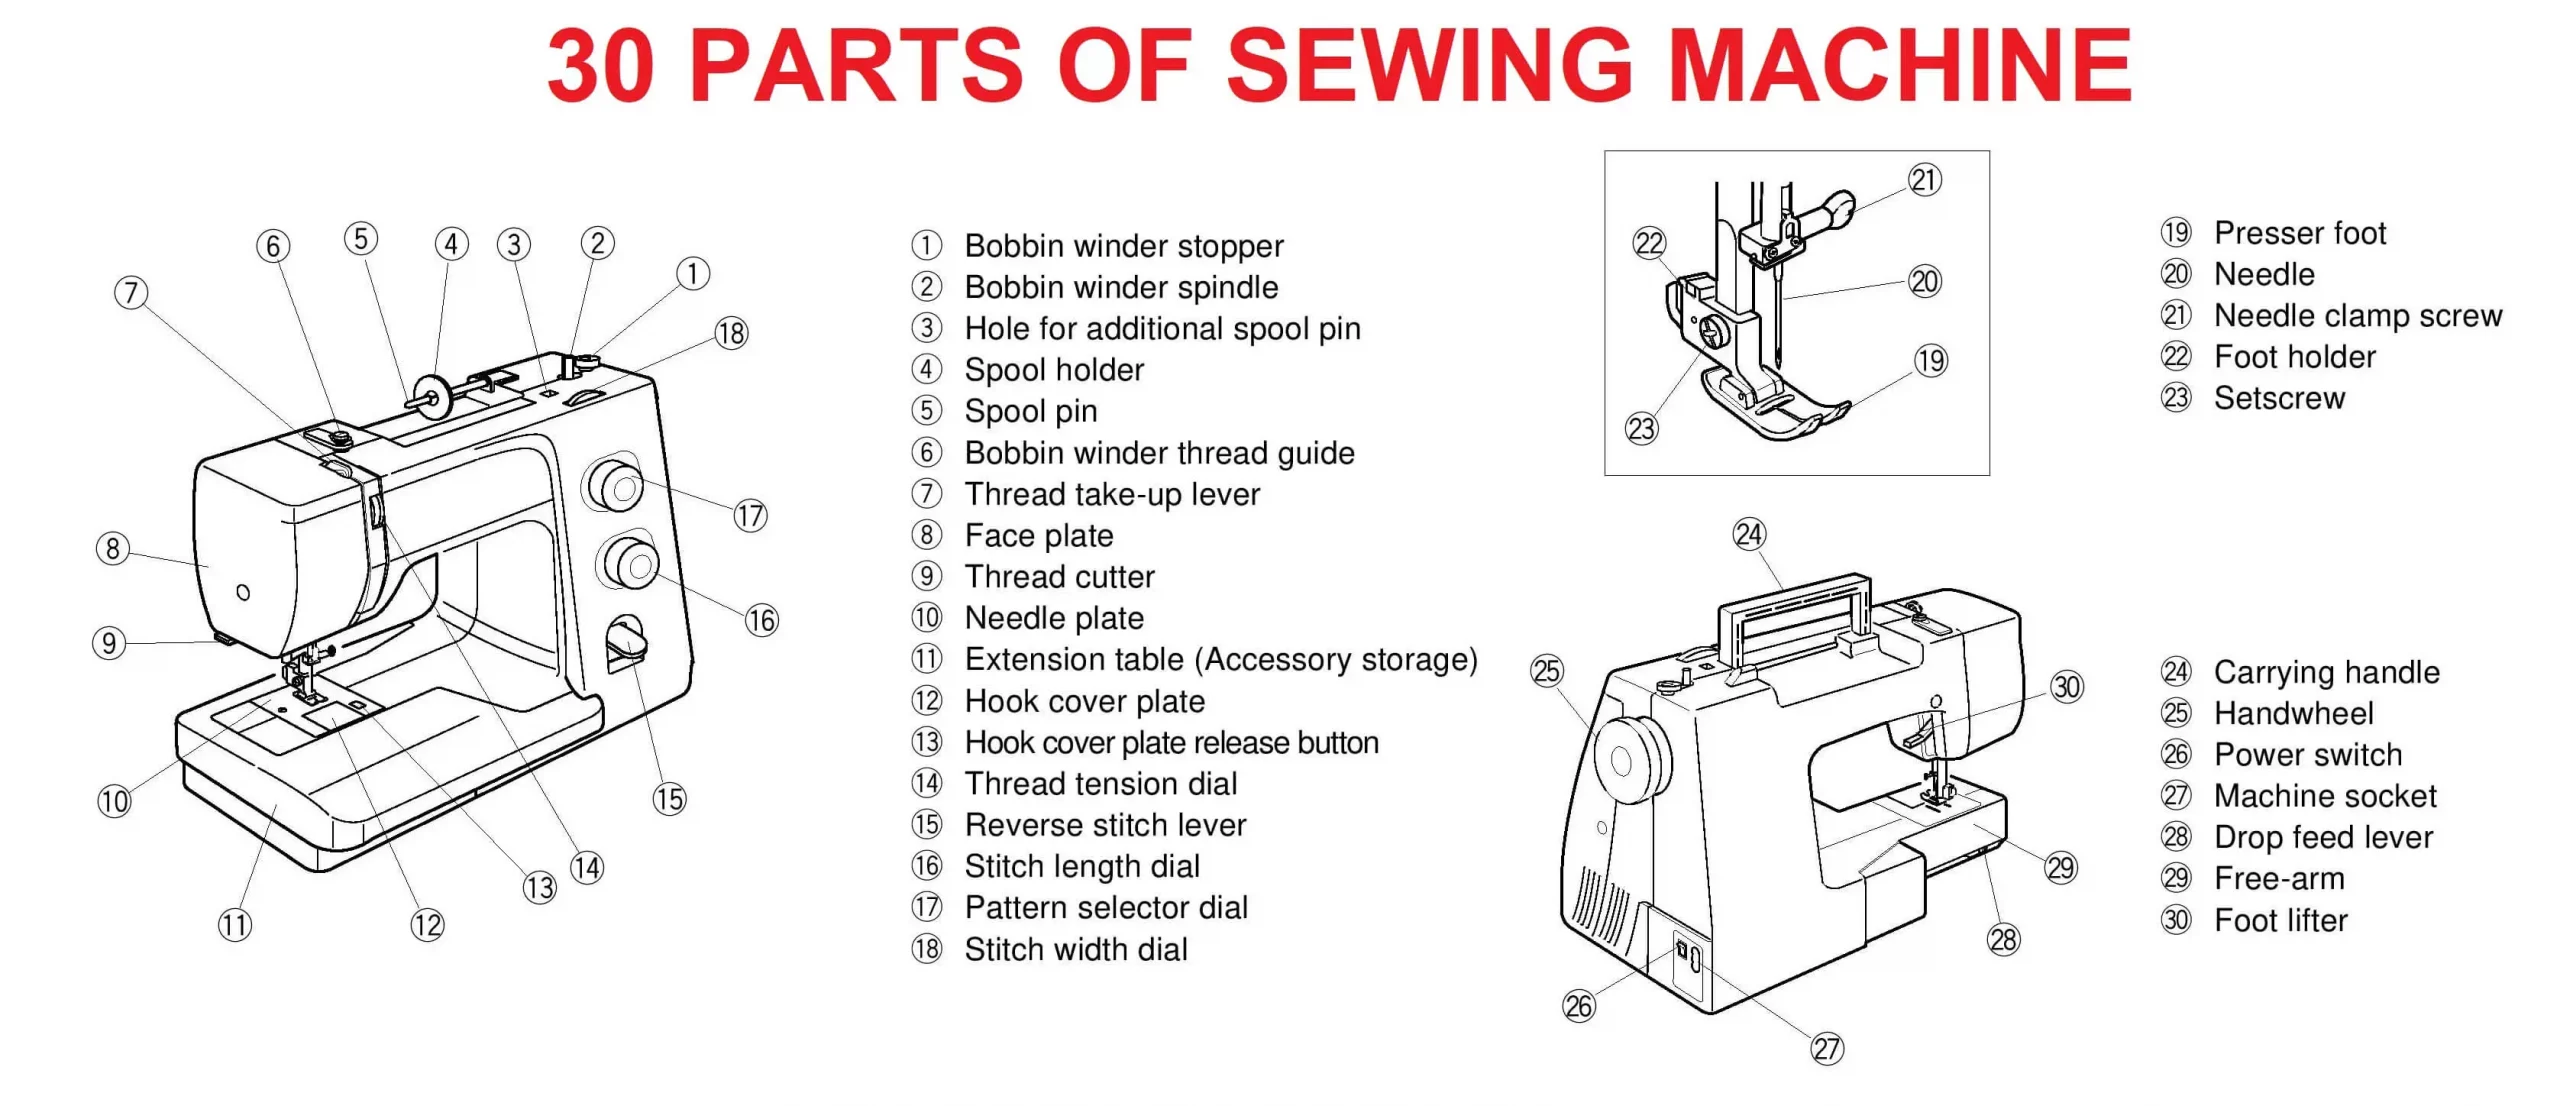 30 Parts of Sewing Machine and Their Functions with Pictures